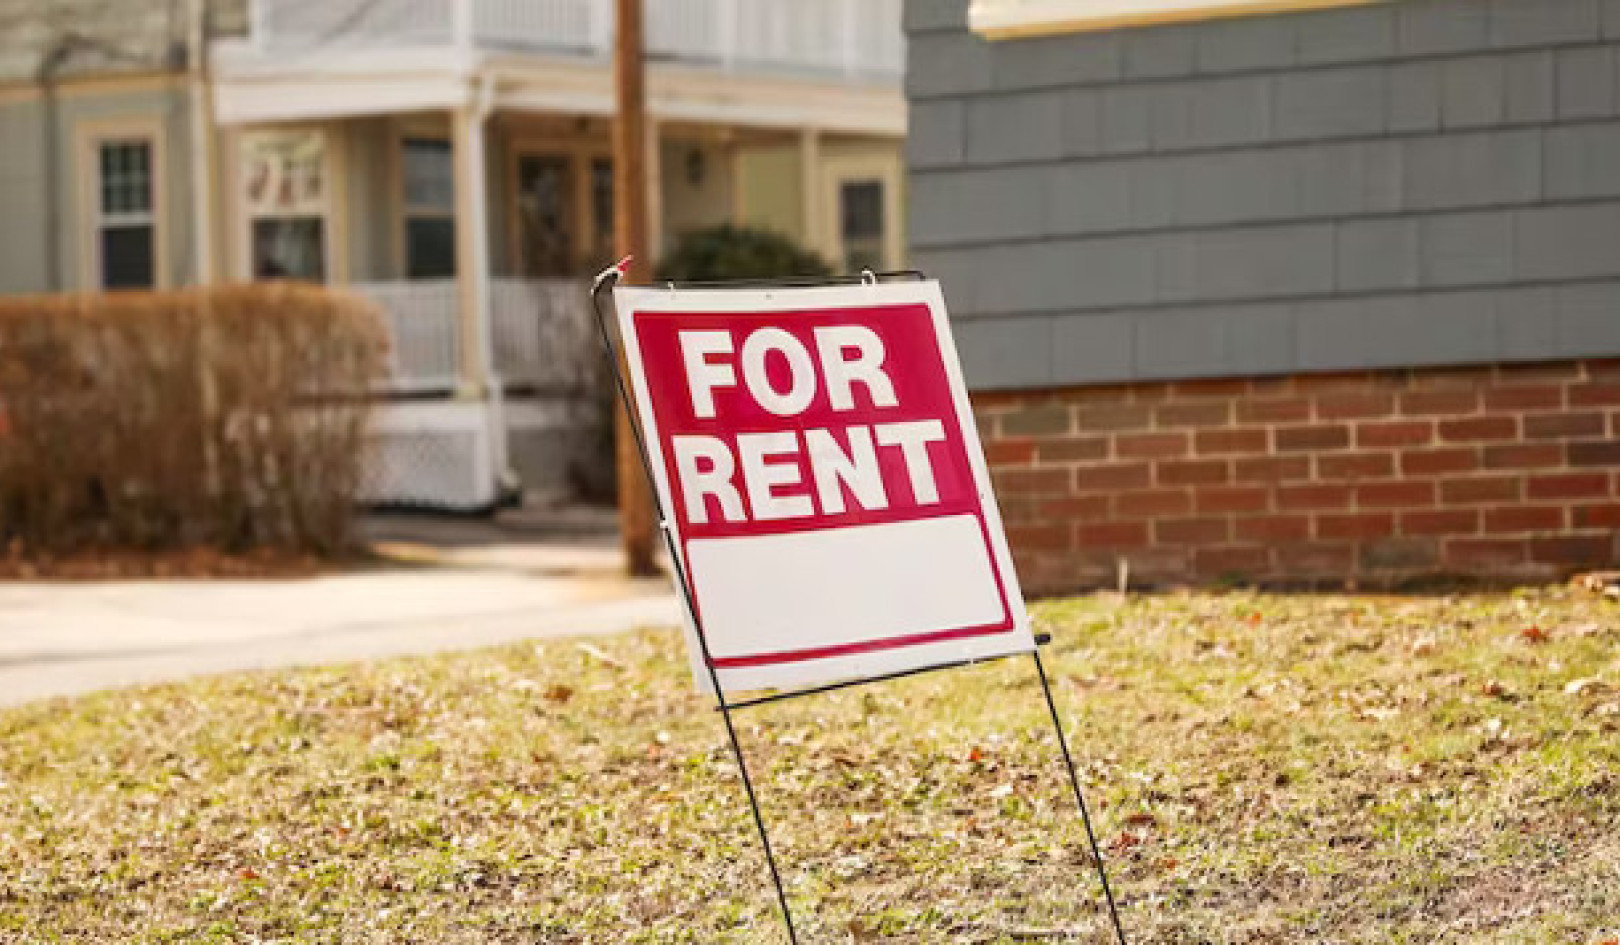 The Hidden Struggle: Two-Thirds of Renters Facing Financial Burdens